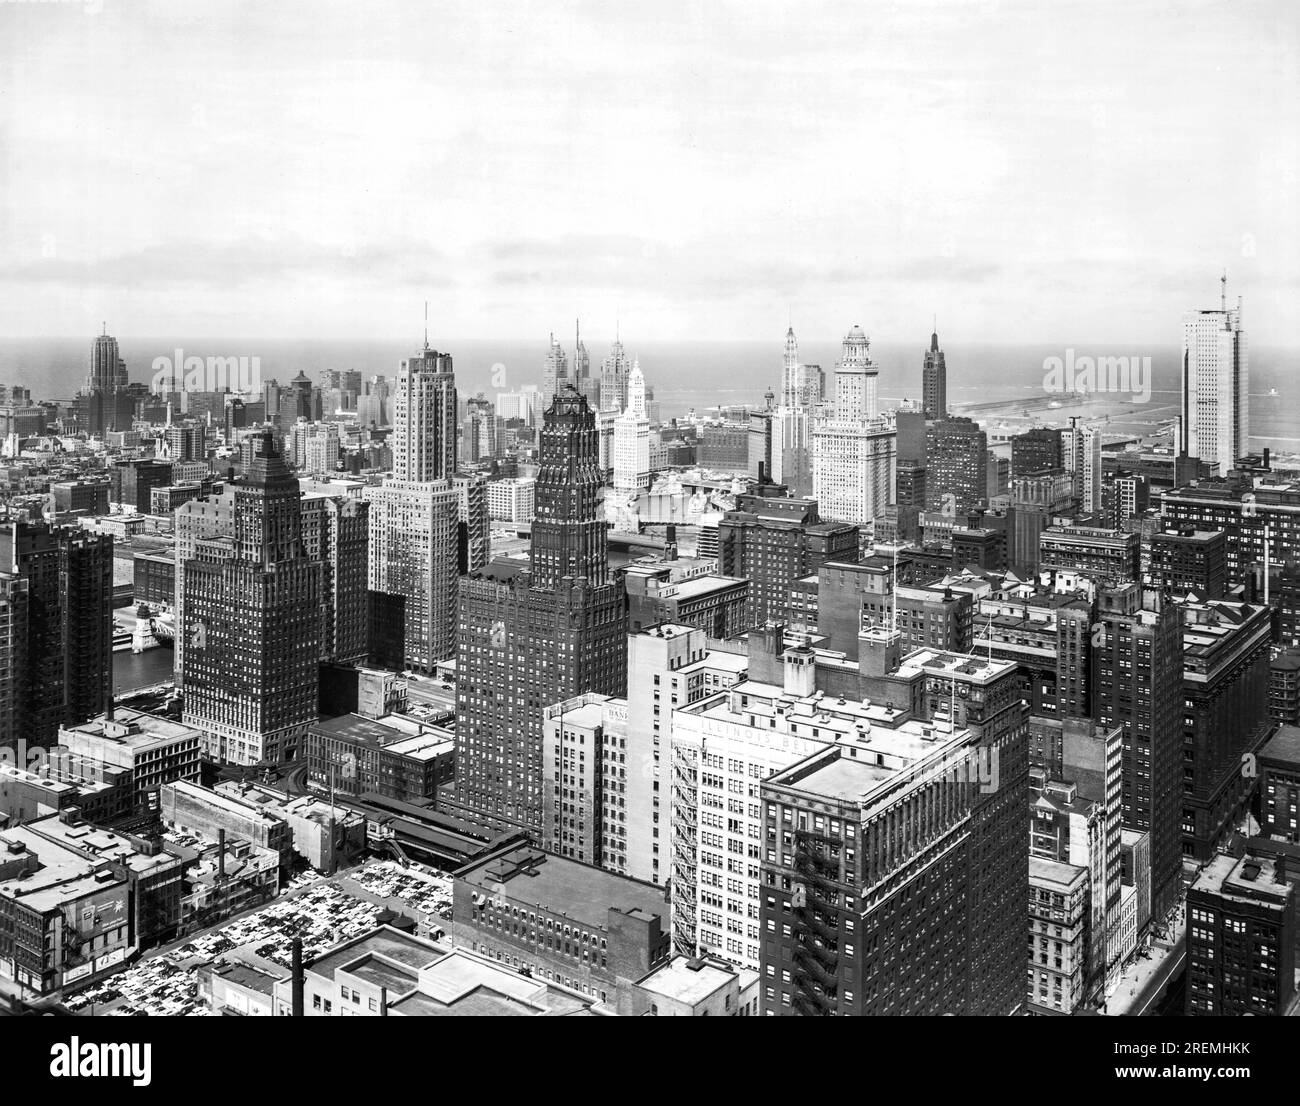 Chicago, Illinois:  1955 Downtown Chicago looking east over the loop and Wacker Drive. Stock Photo